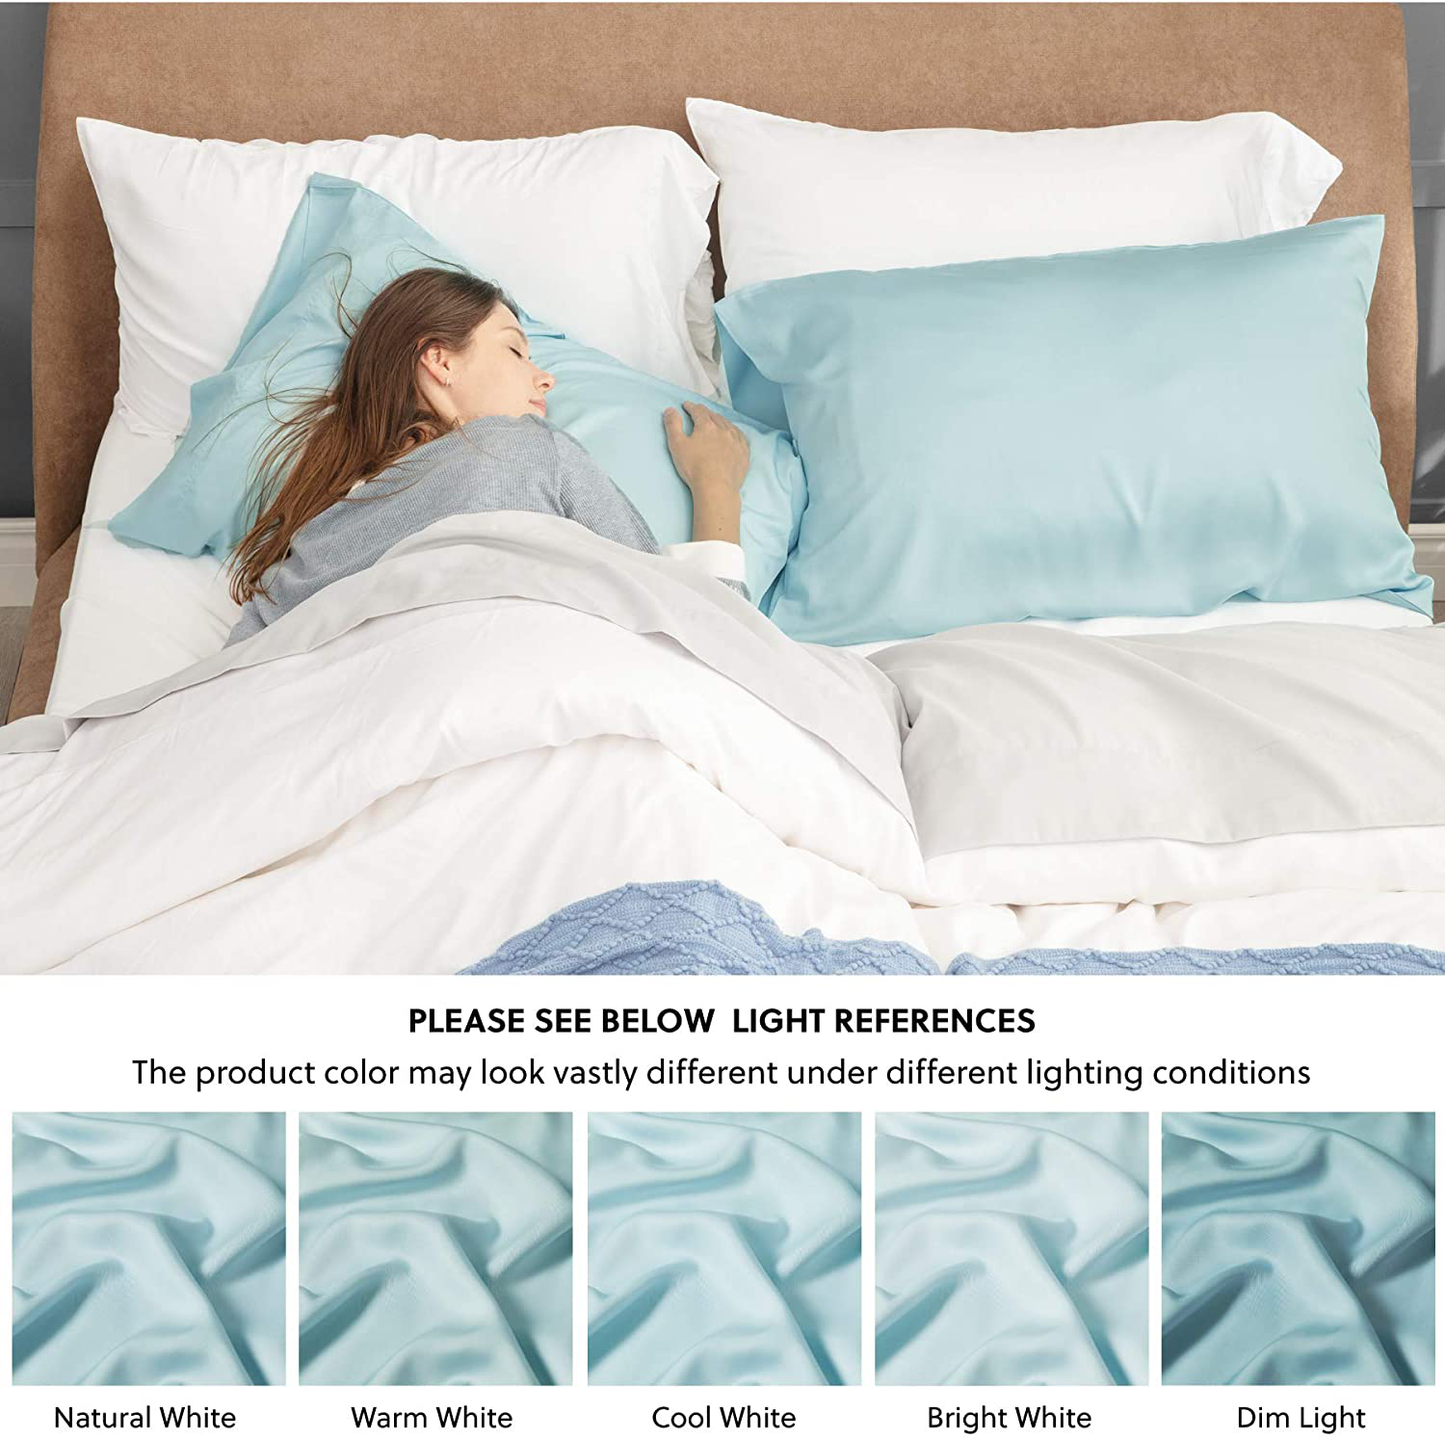 Bedsure Bamboo Pillow Cases Queen Size Set of 2 - Aqua Blue Cooling Pillowcases 2 Pack with Envelope Closure, Cool and Breathable Pillow Case, 20x30 inches